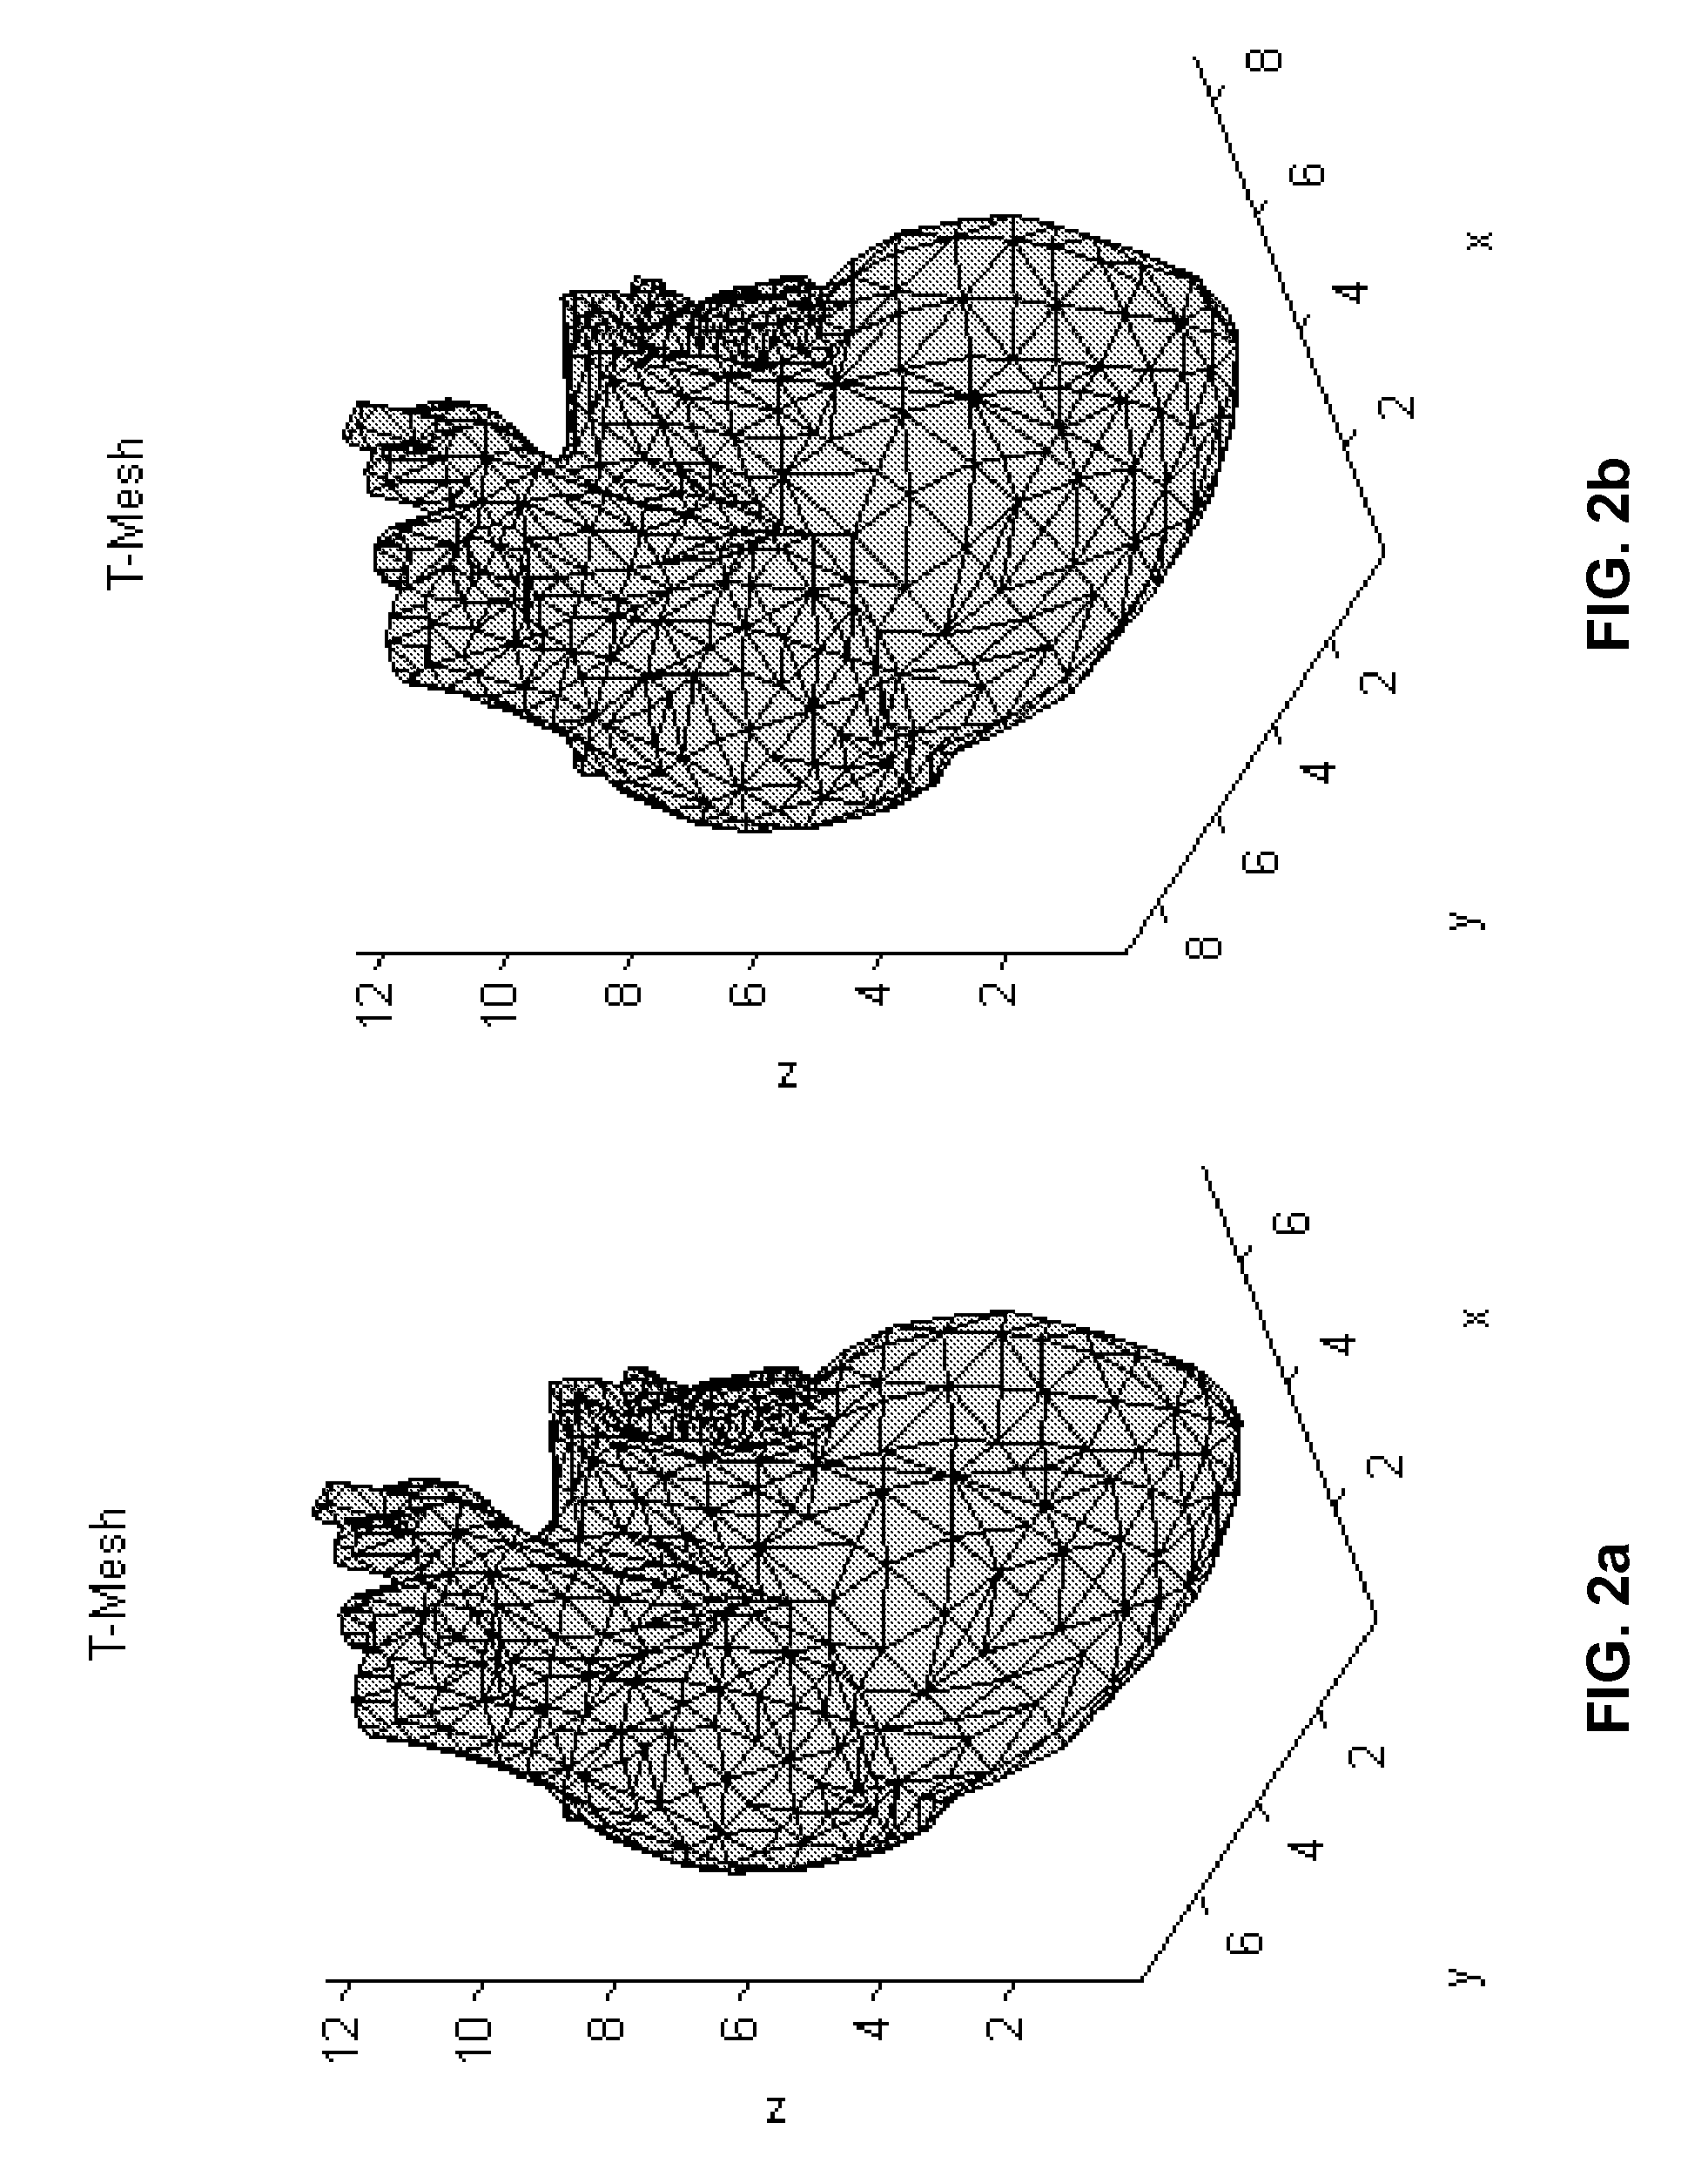 System and method for non-invasive instantaneous and continuous measurement of cardiac chamber volume